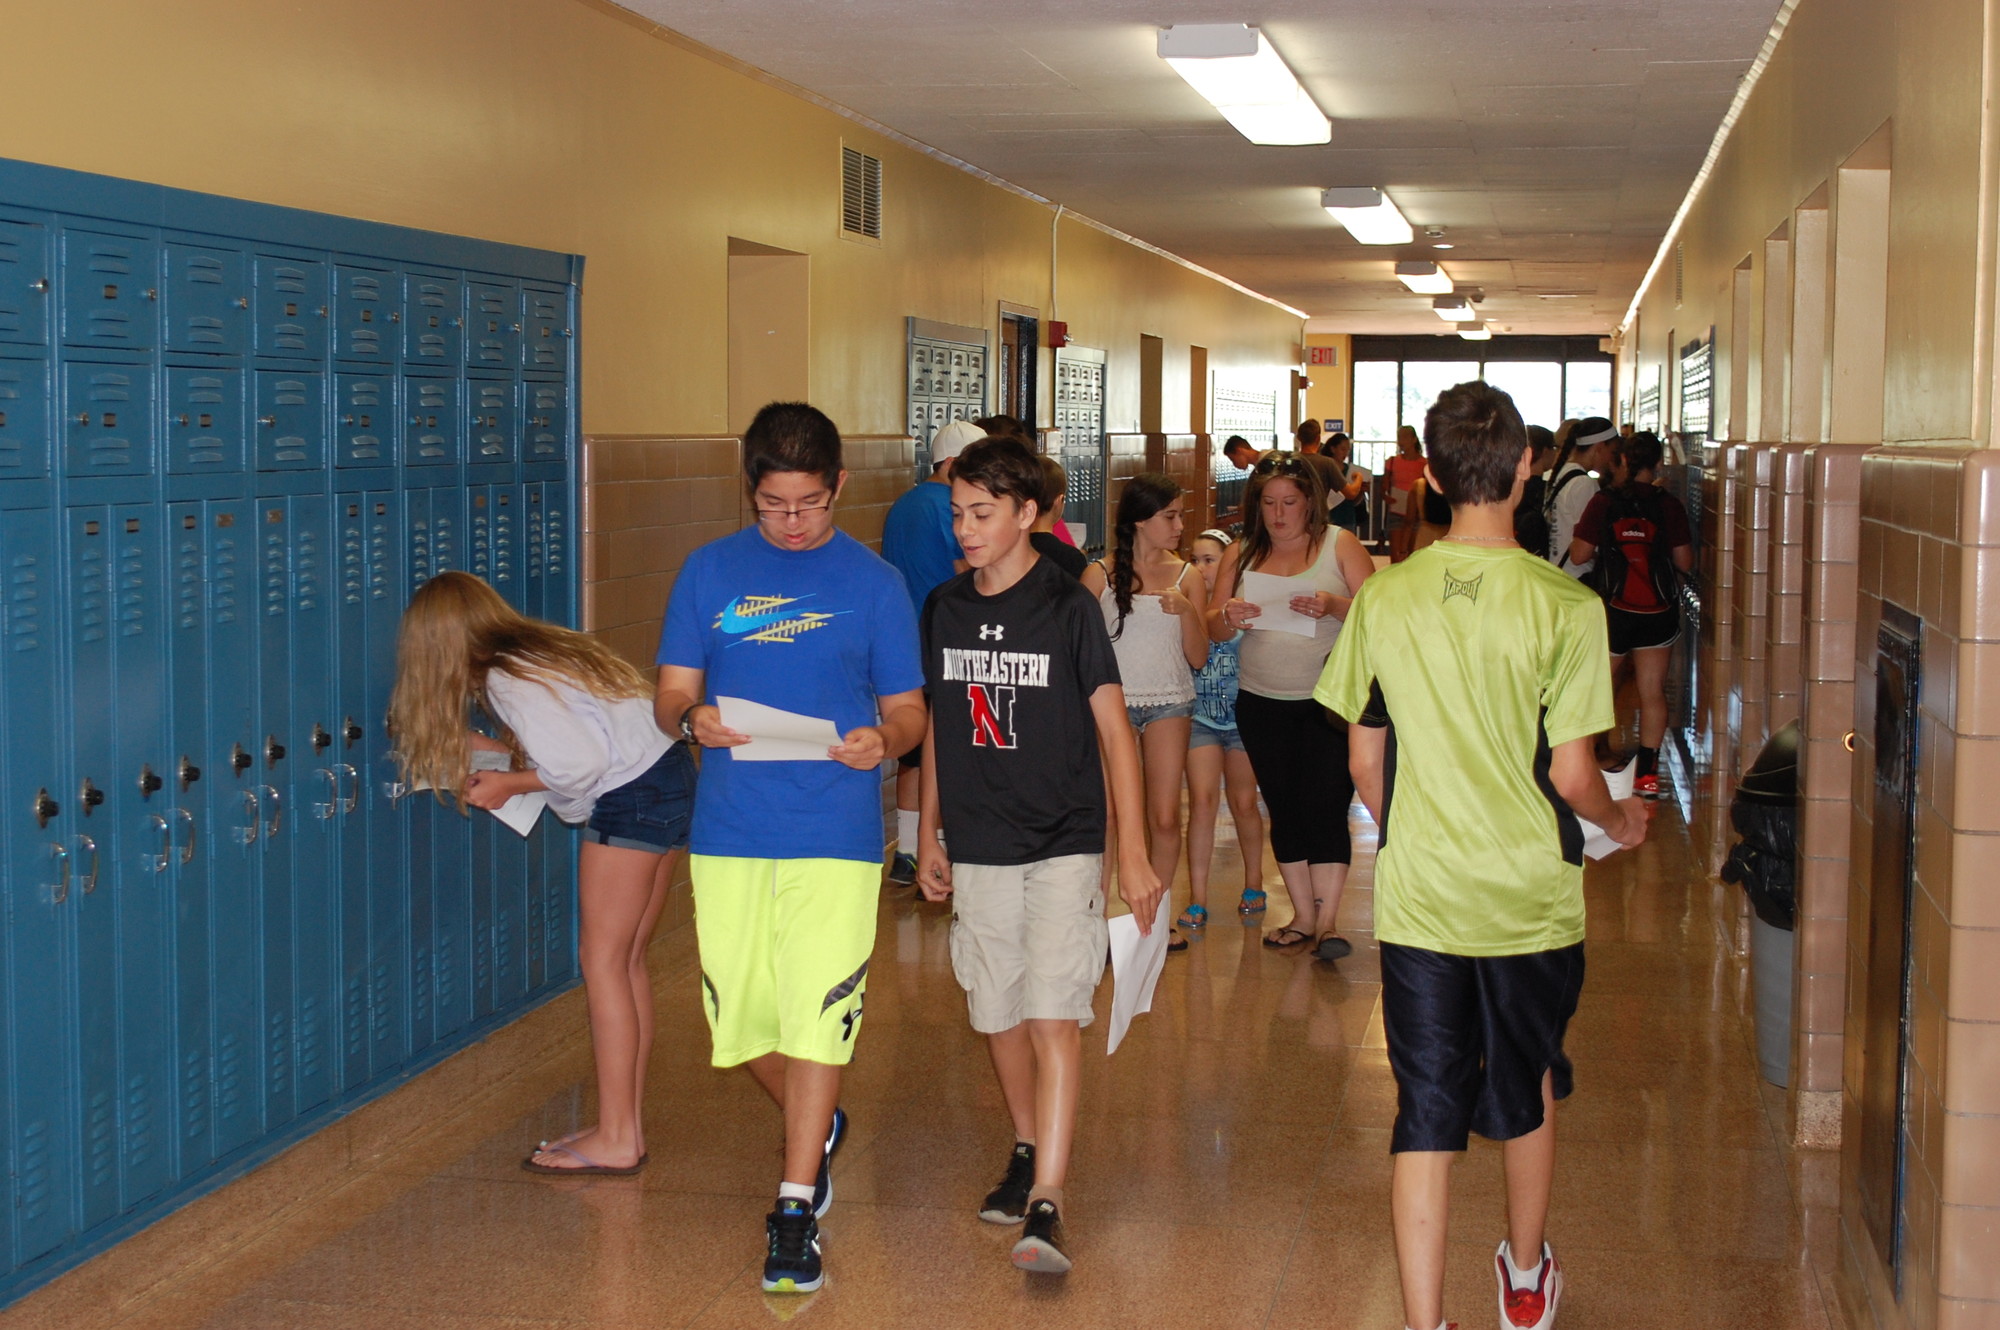 Ninth-graders took a tour of Wantagh High School to learn where their classes are during freshman orientation last week.